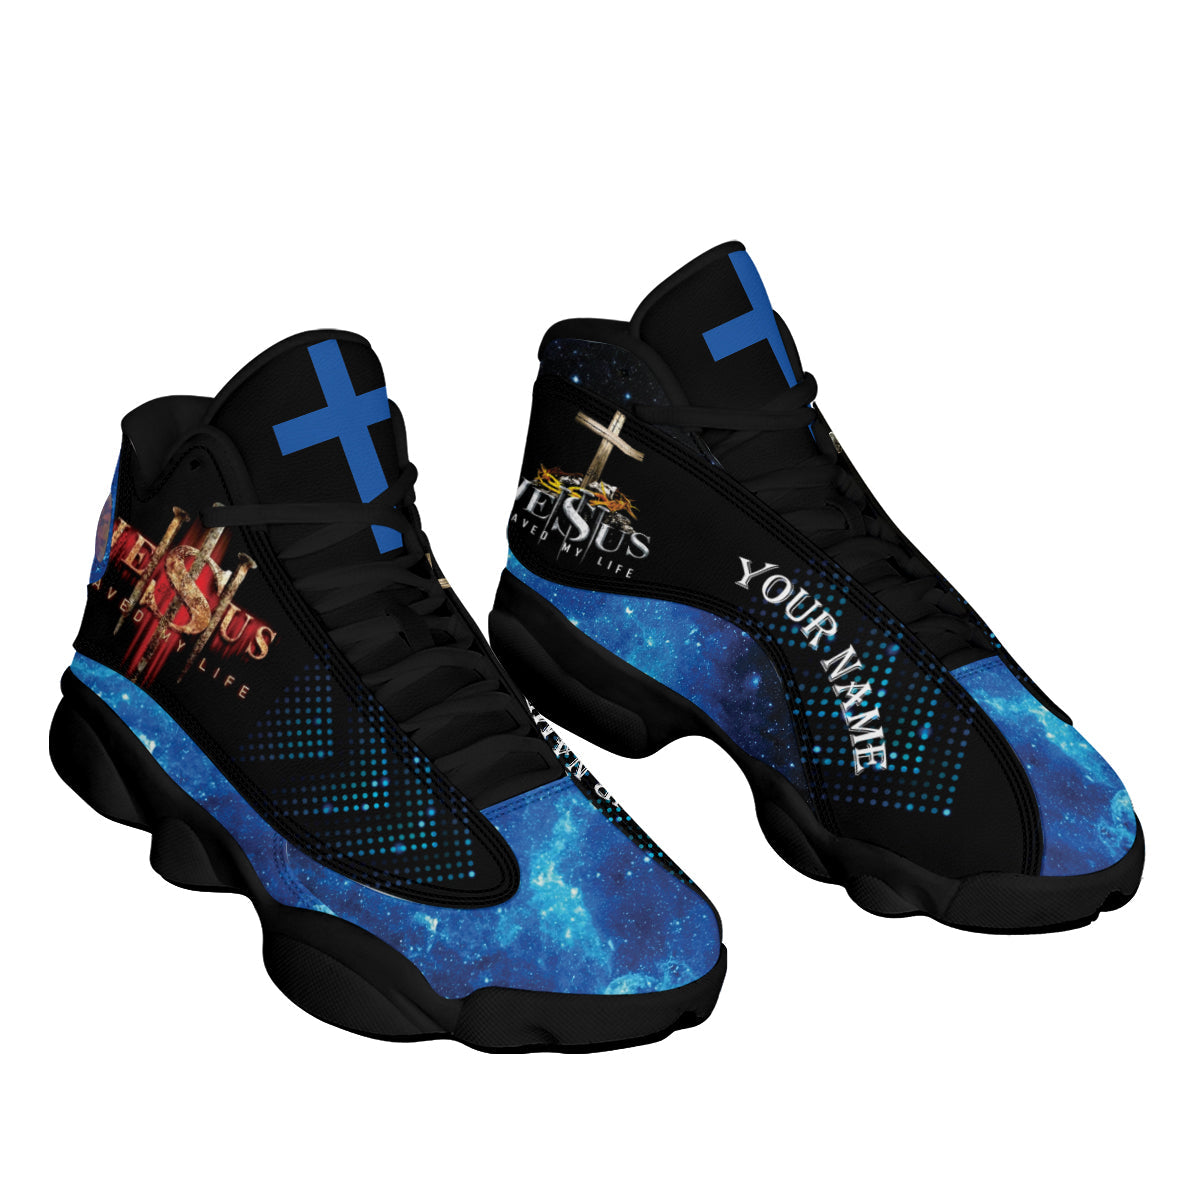 Personalized Jesus Saved My Life Basketball Shoes For Men Women - Christian Shoes - Jesus Shoes - Unisex Basketball Shoes